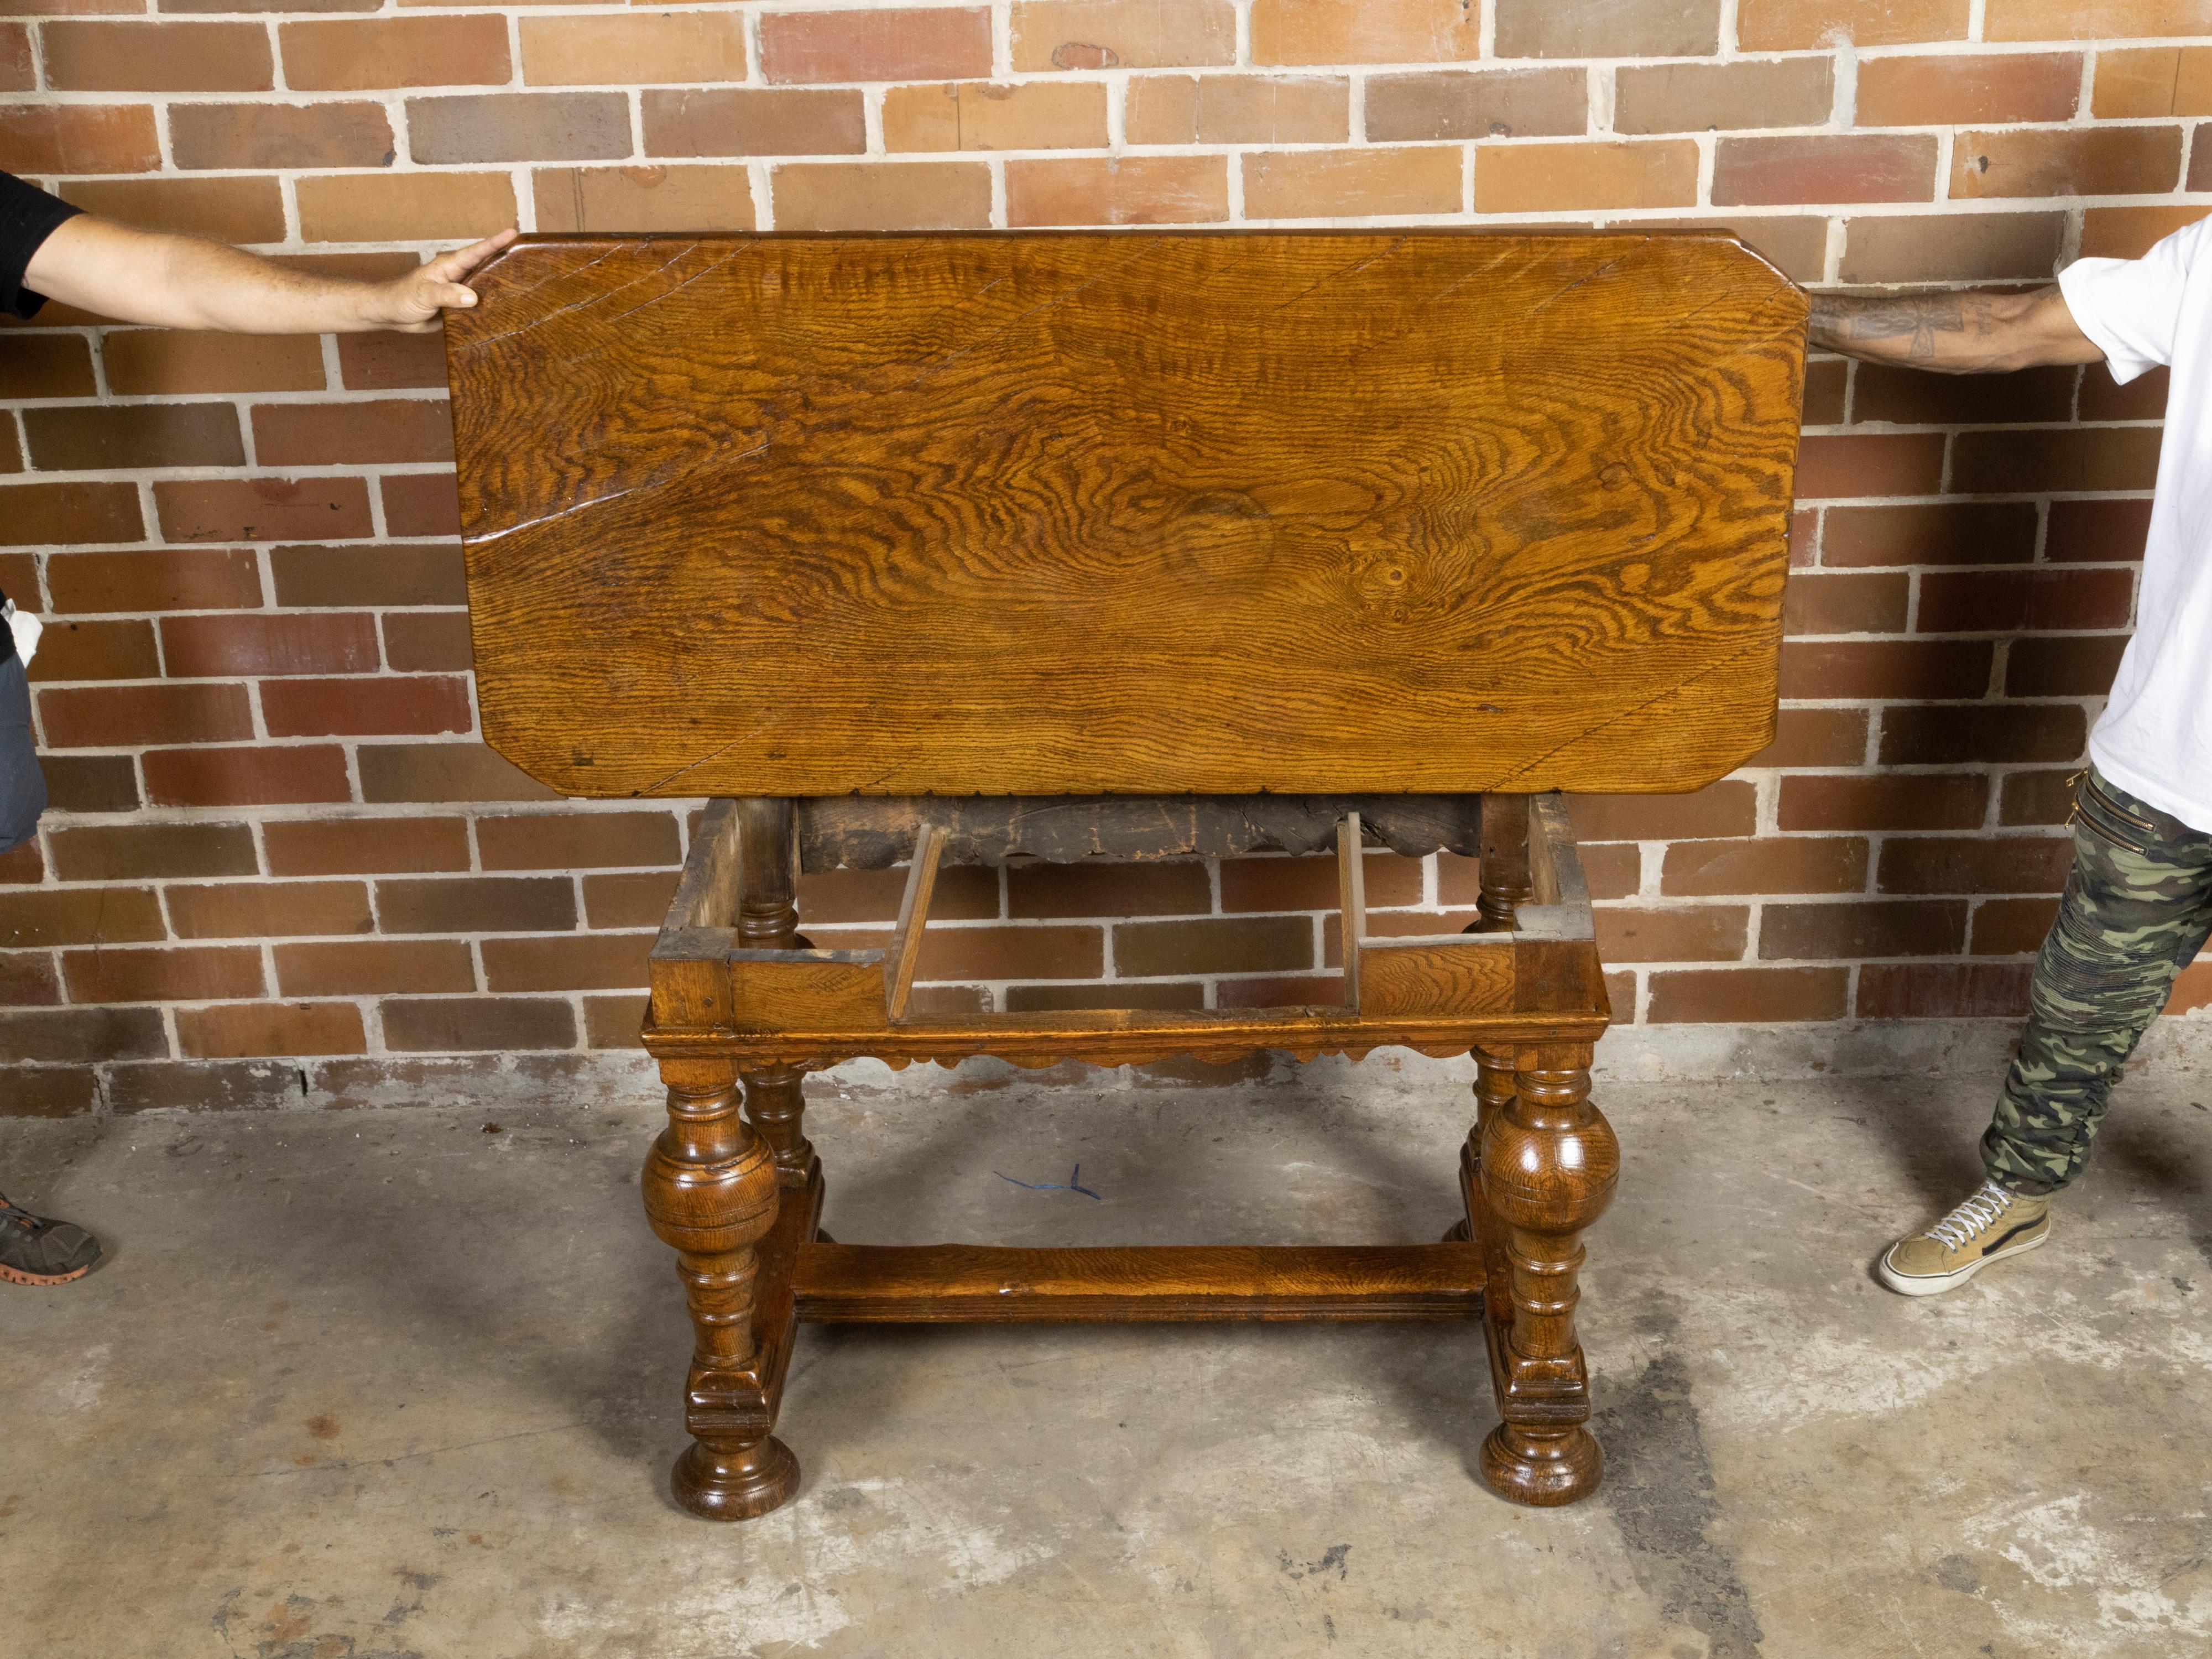 Baroque Danish Langeland Late 19th Century Oak Table with Carved Apron and Turned Legs For Sale